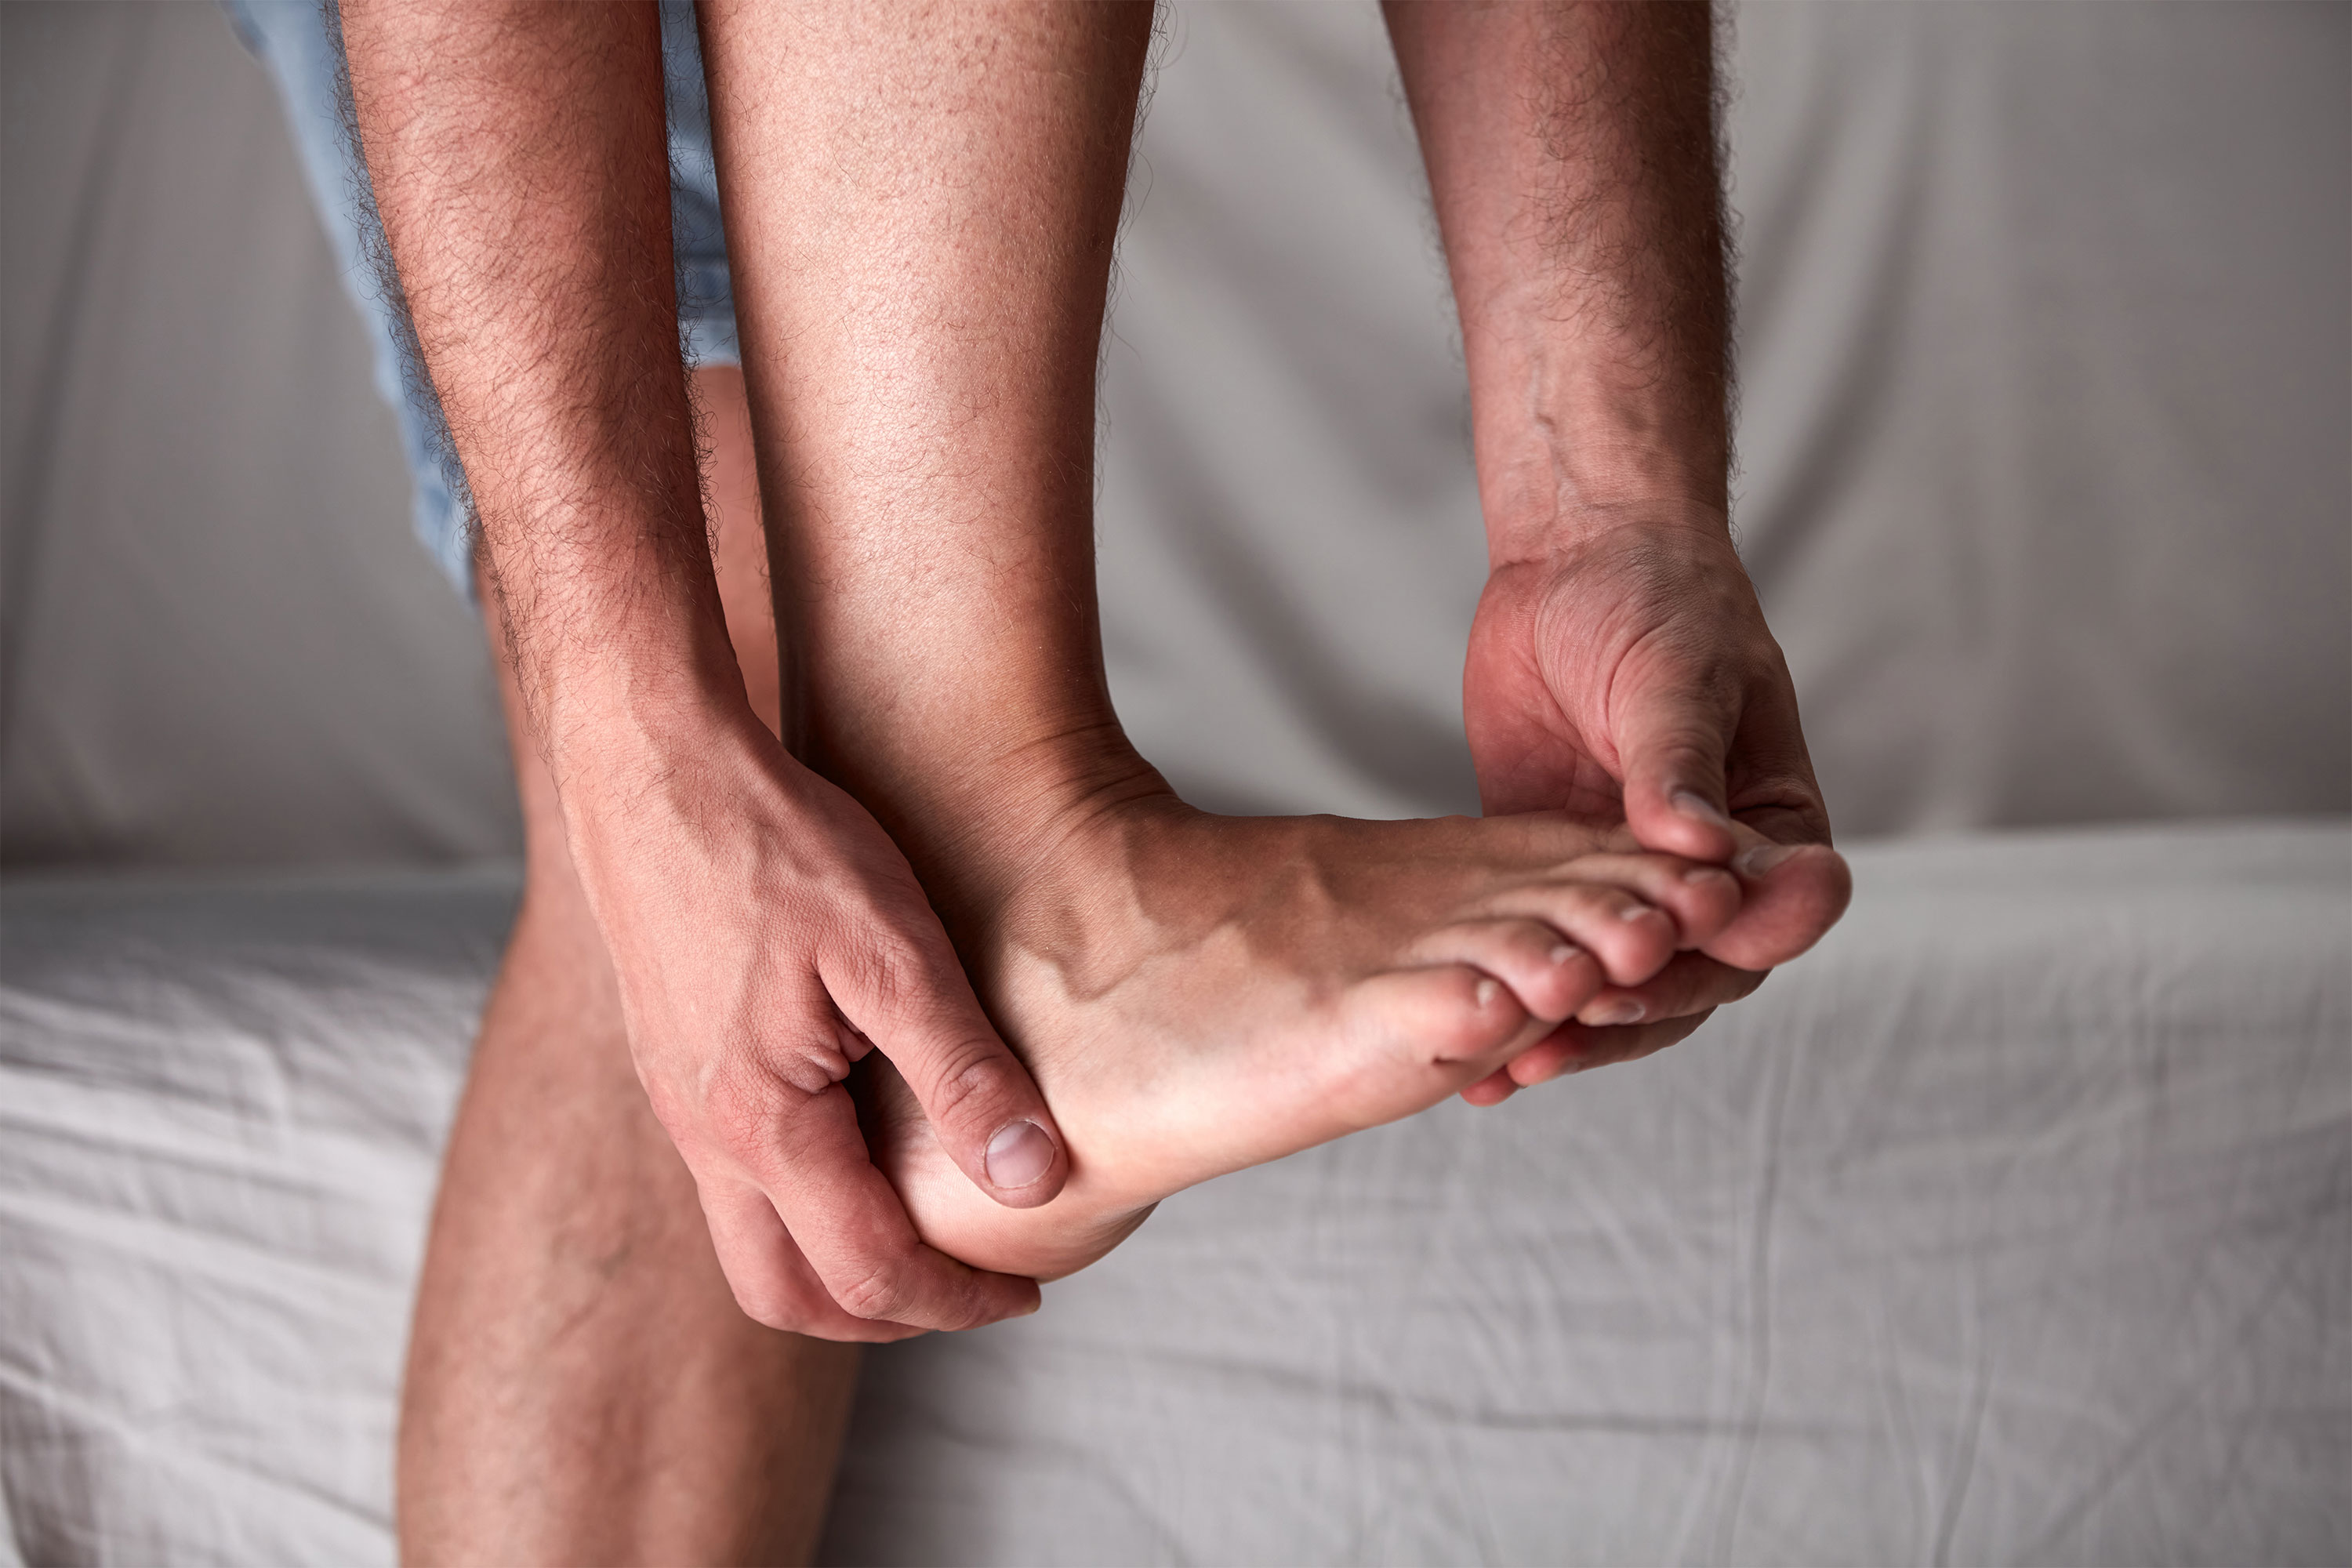 Lateral Foot Pain: Symptoms, Causes and Treatment